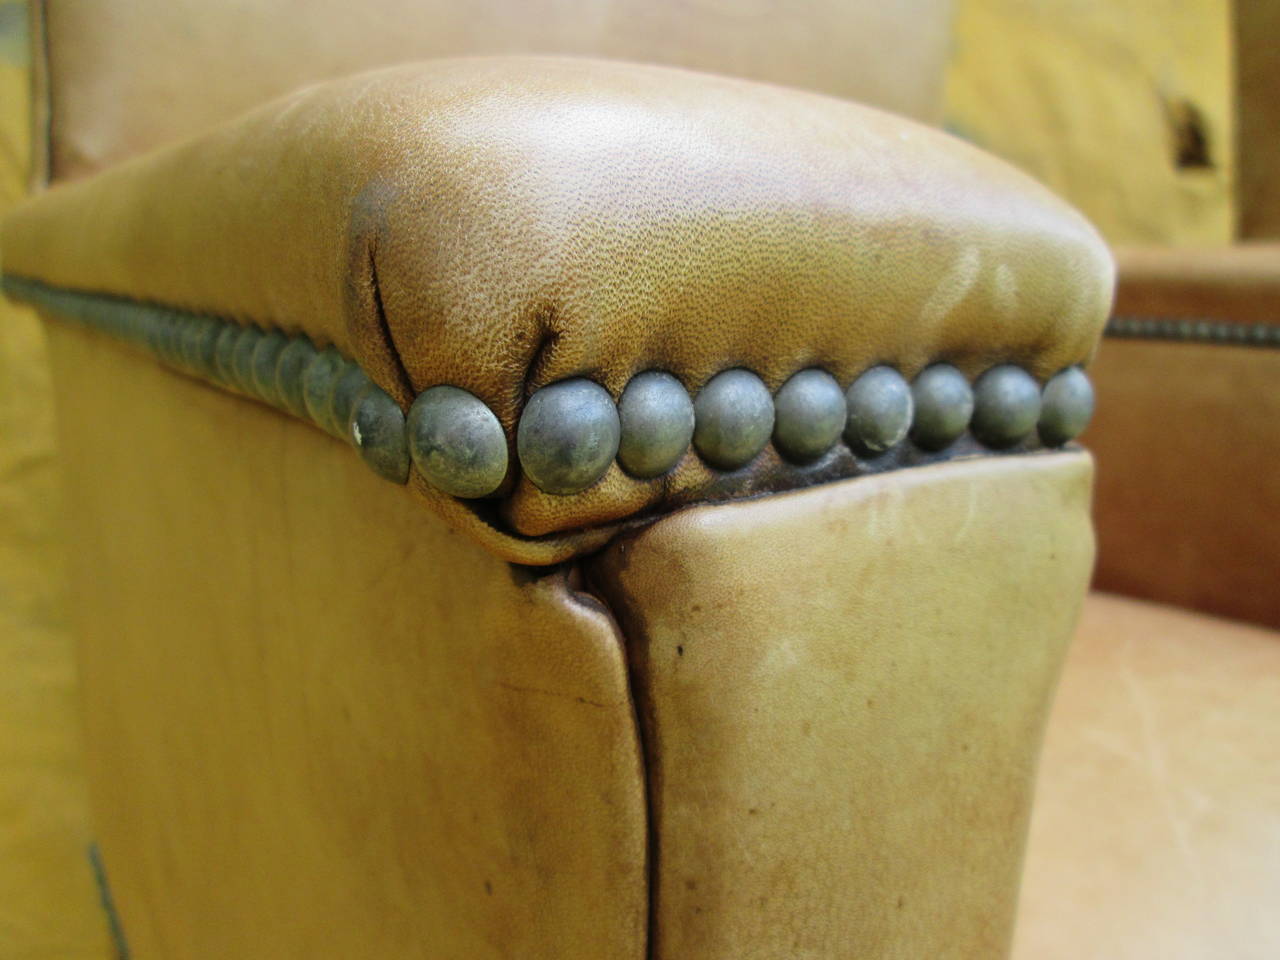 Pair of Ralph Lauren chairs in camel colored leather. Turned stretcher bases. Nailhead details. Label on underside as shown.